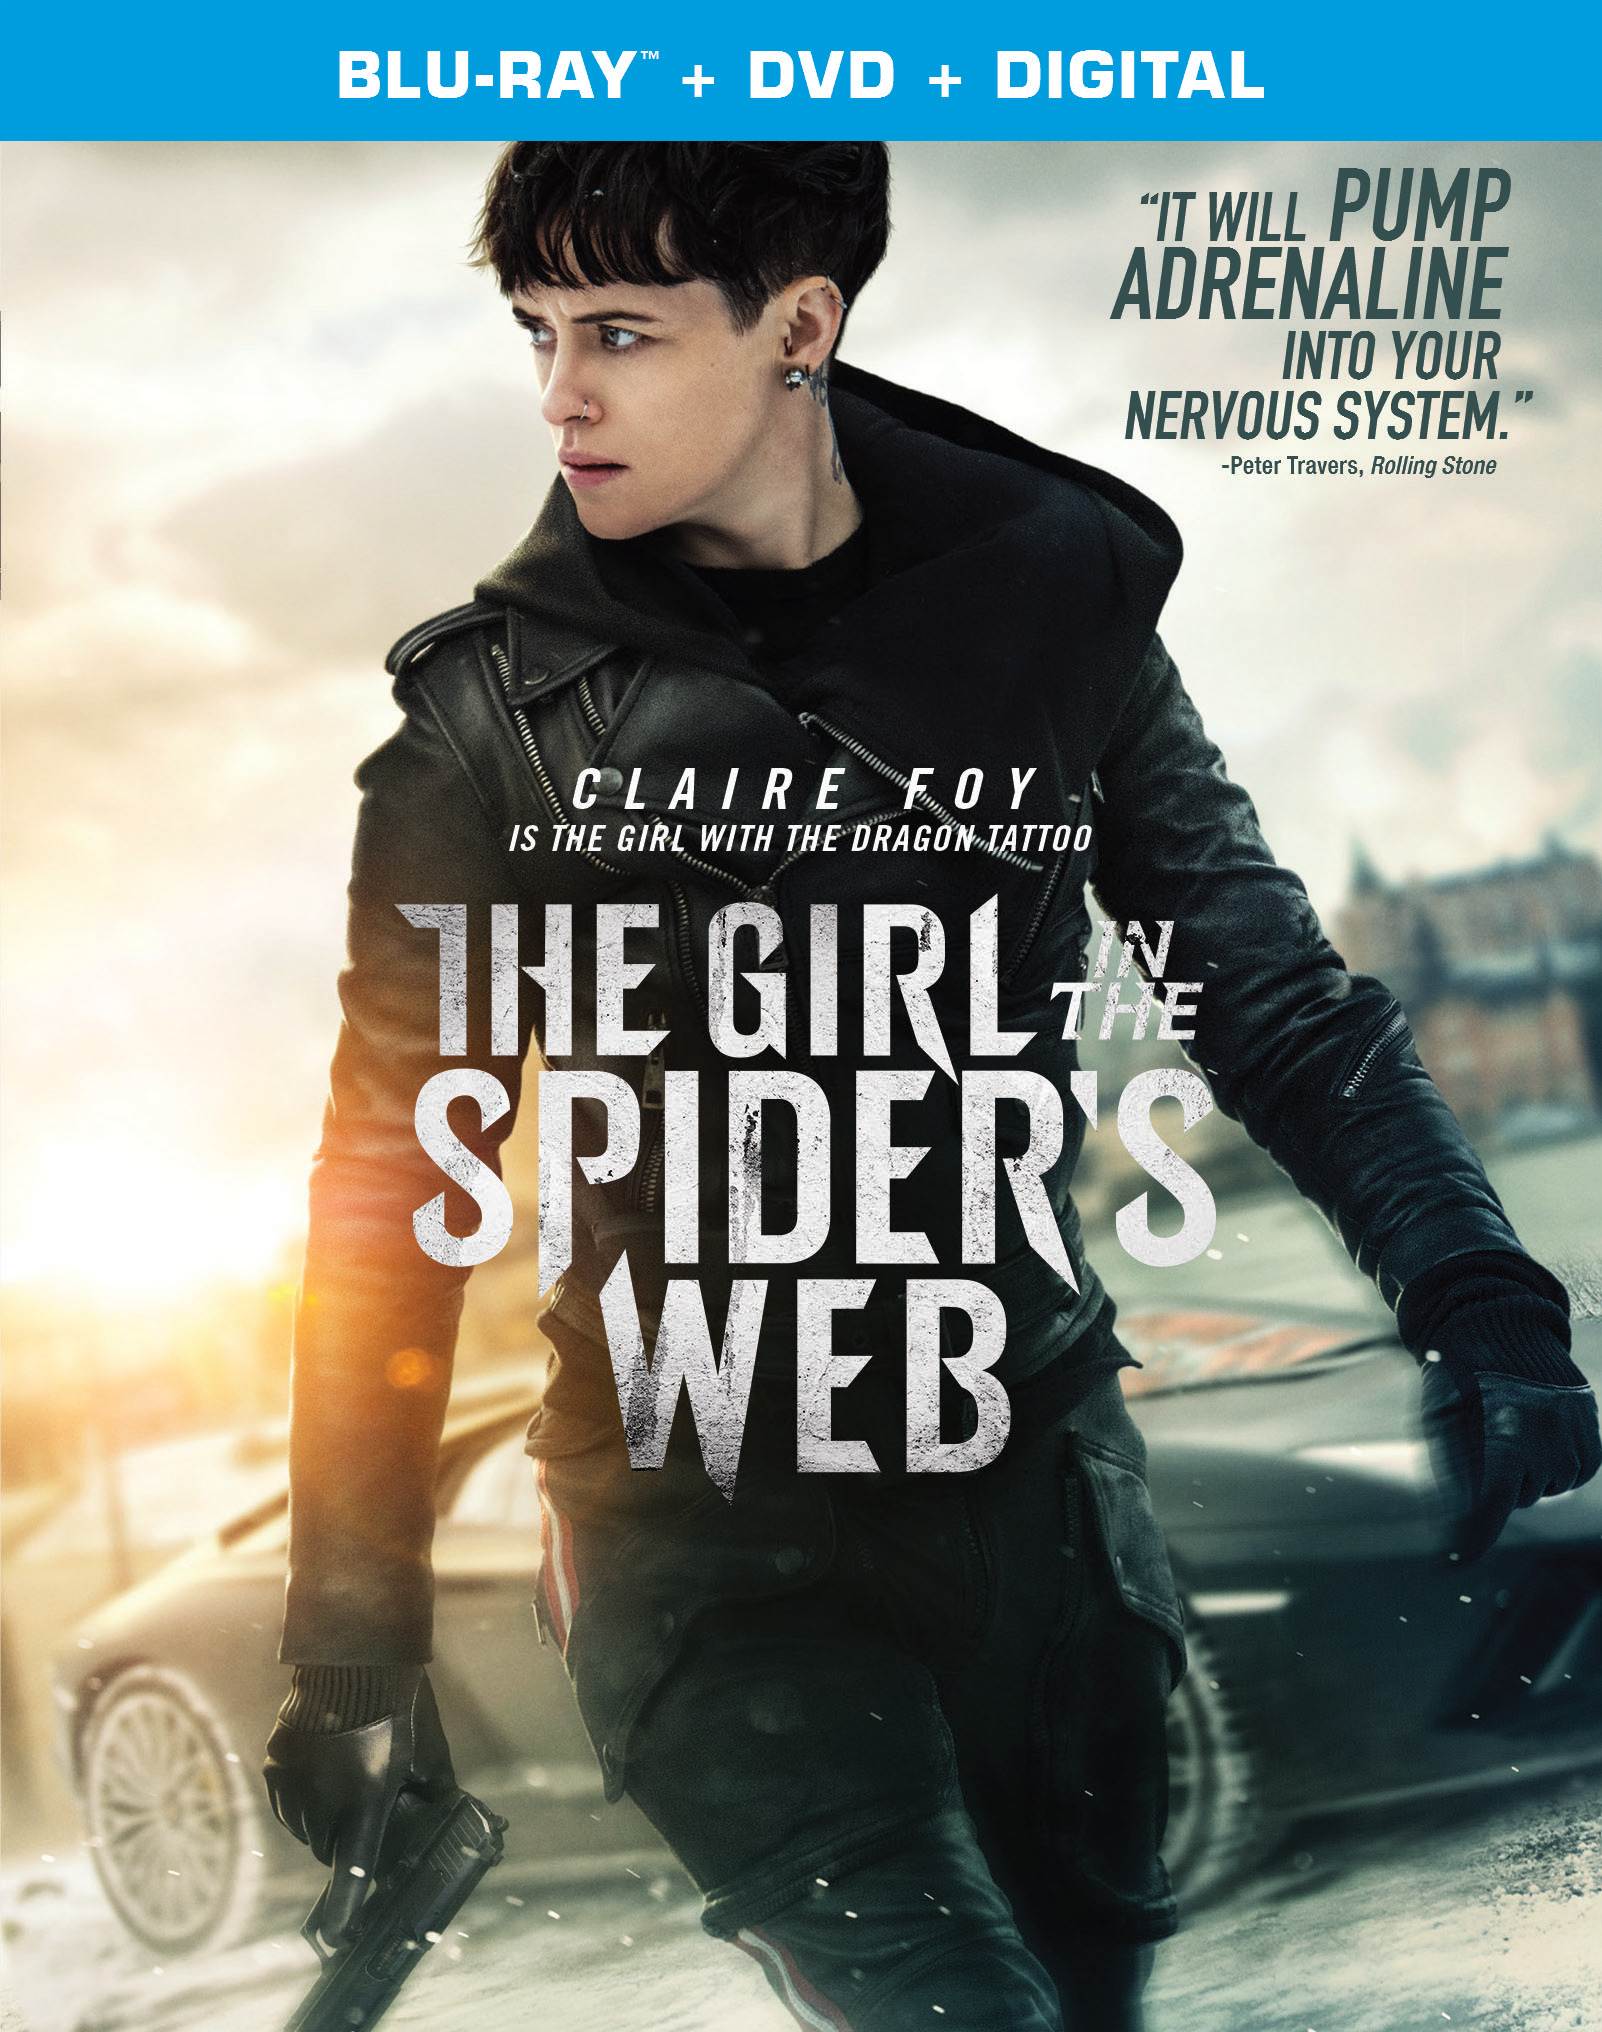 The Girl In The Spider's Web Blu-Ray Combo Pack cover (Sony Pictures Home Entertainment)